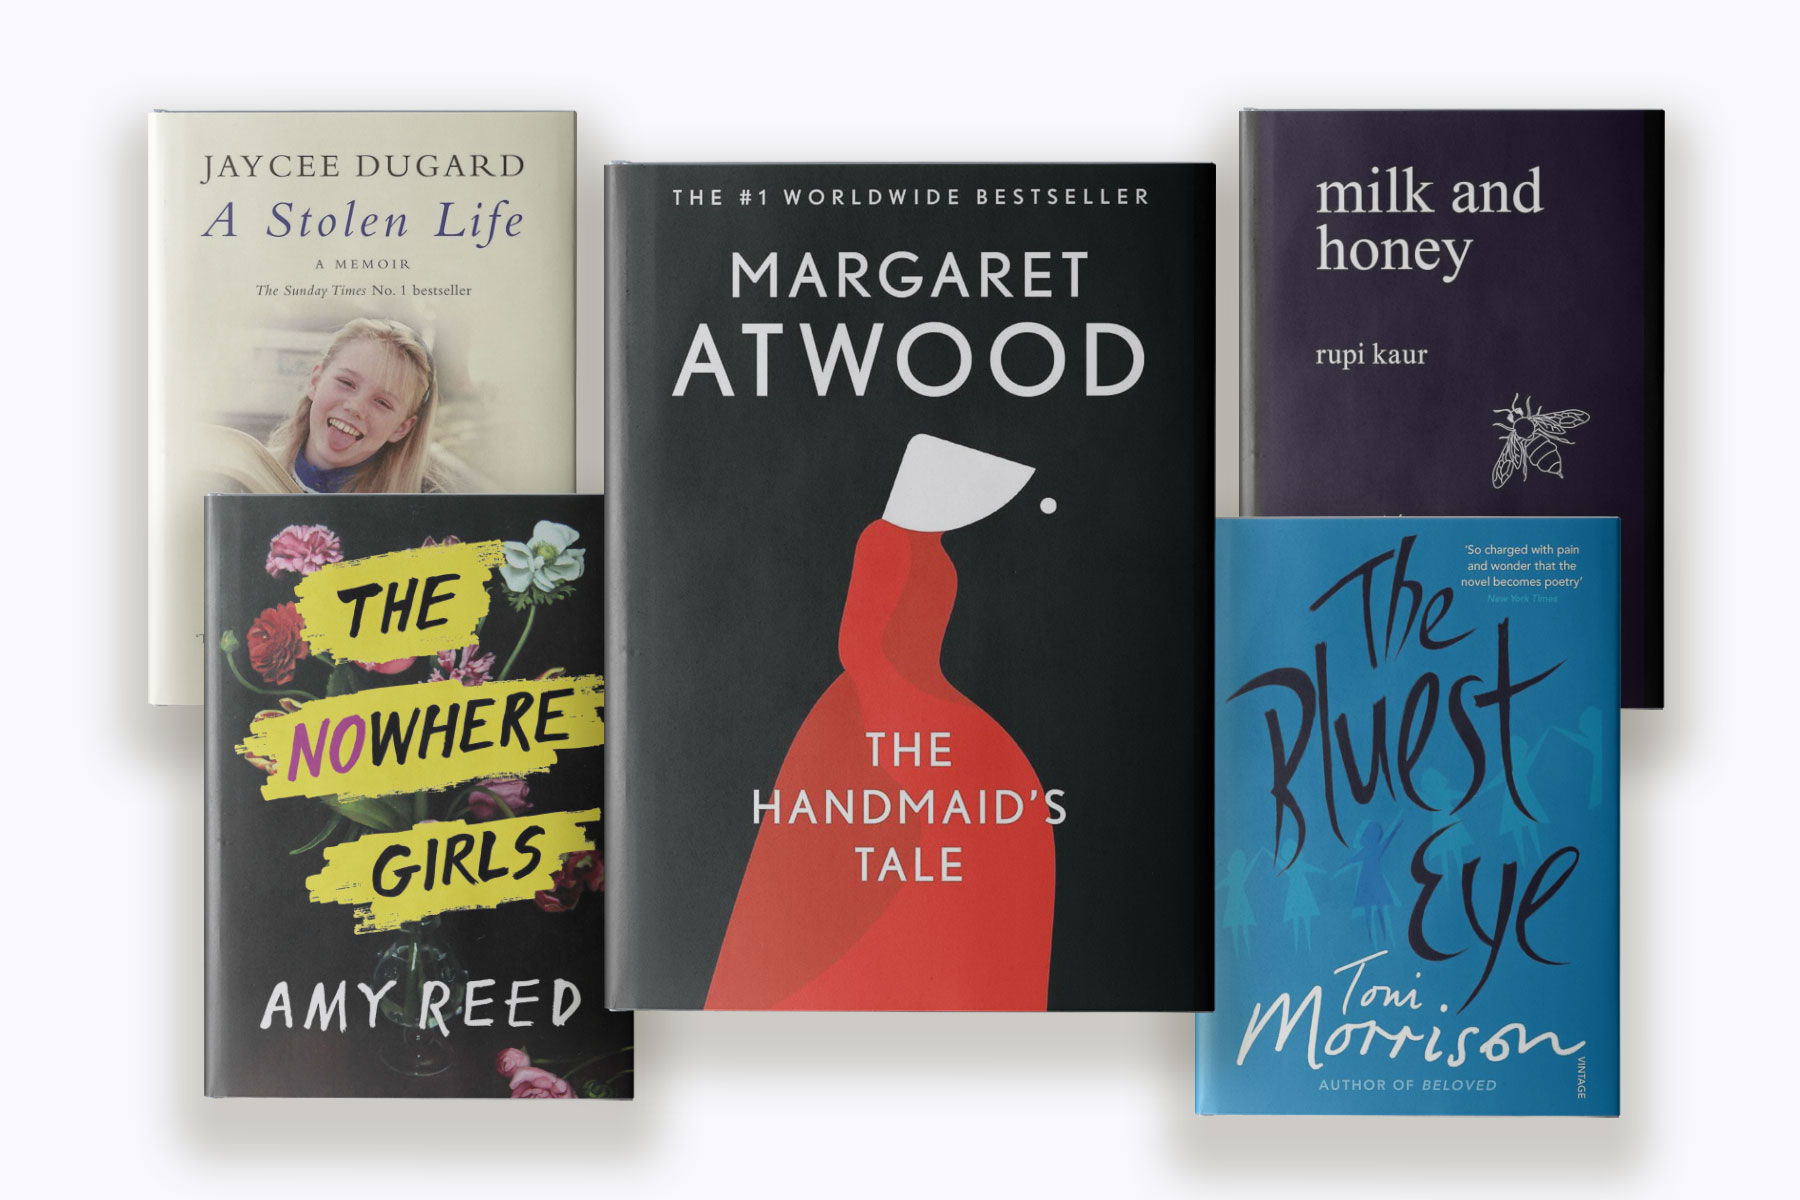 An image featuring Pen America's newly banned book covers from; "A Stolen Life: A Memior ny Jaycee Dugard, "The Nowhere Girls" by Amy Reed, "The Handmaids Tale, by Margaret Atwood, "Milk and Honey, by Rupi Kaur, and "The Bluest Eye" by Toni Morrison.